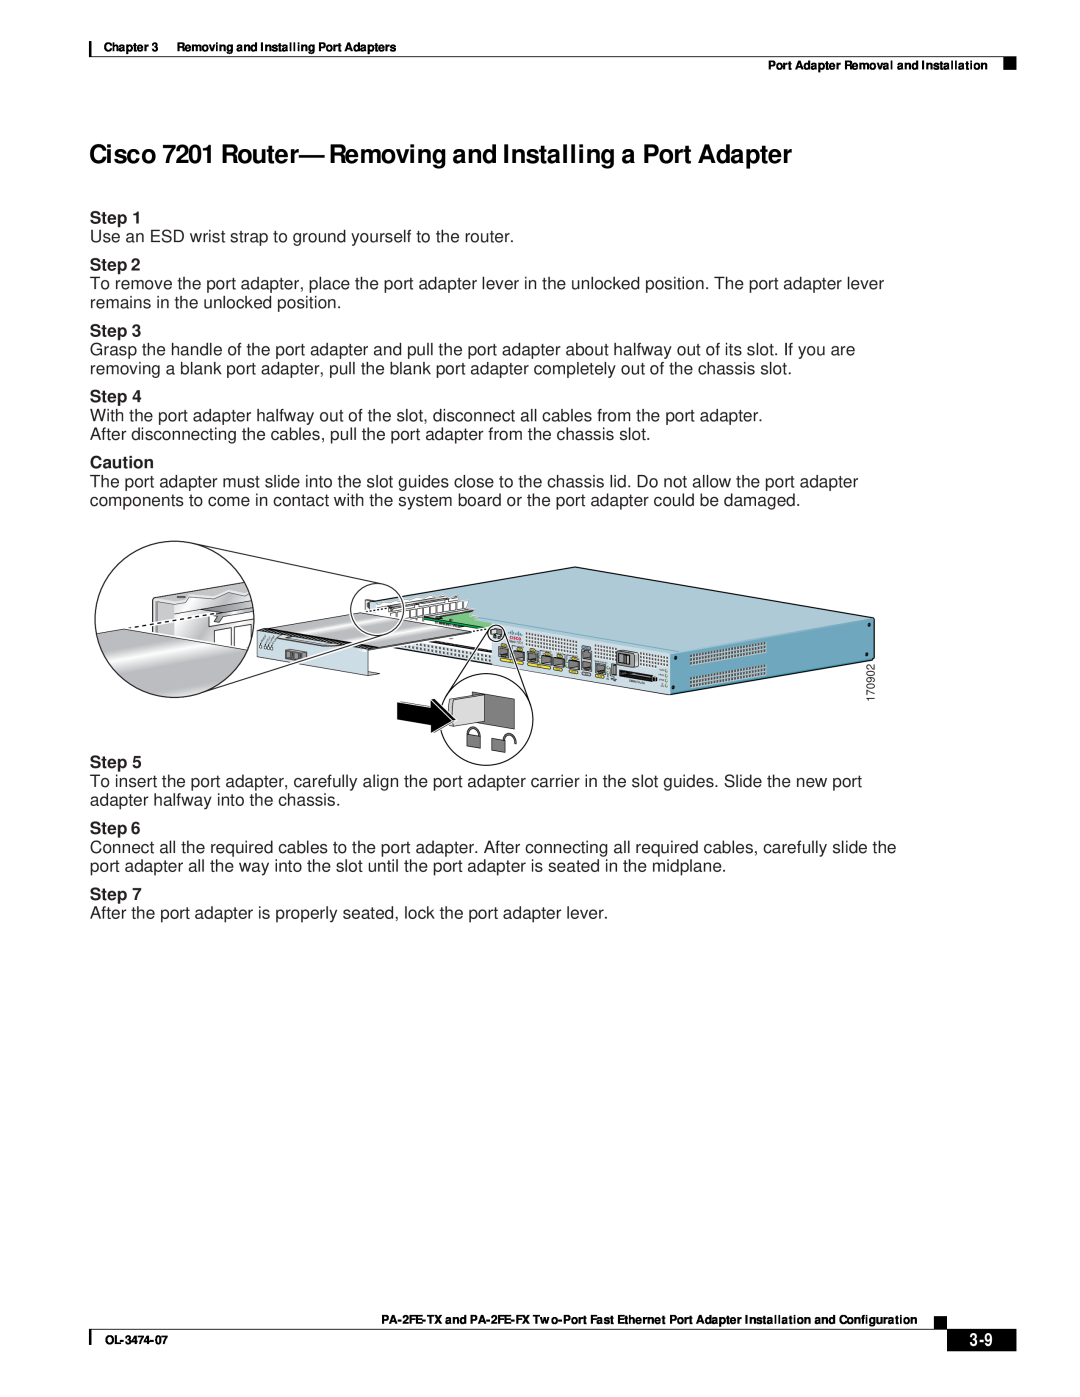 Cisco Systems PA-2FE-FX, PA-2FE-TX manual Cisco 7201 Router-Removing and Installing a Port Adapter, Step 